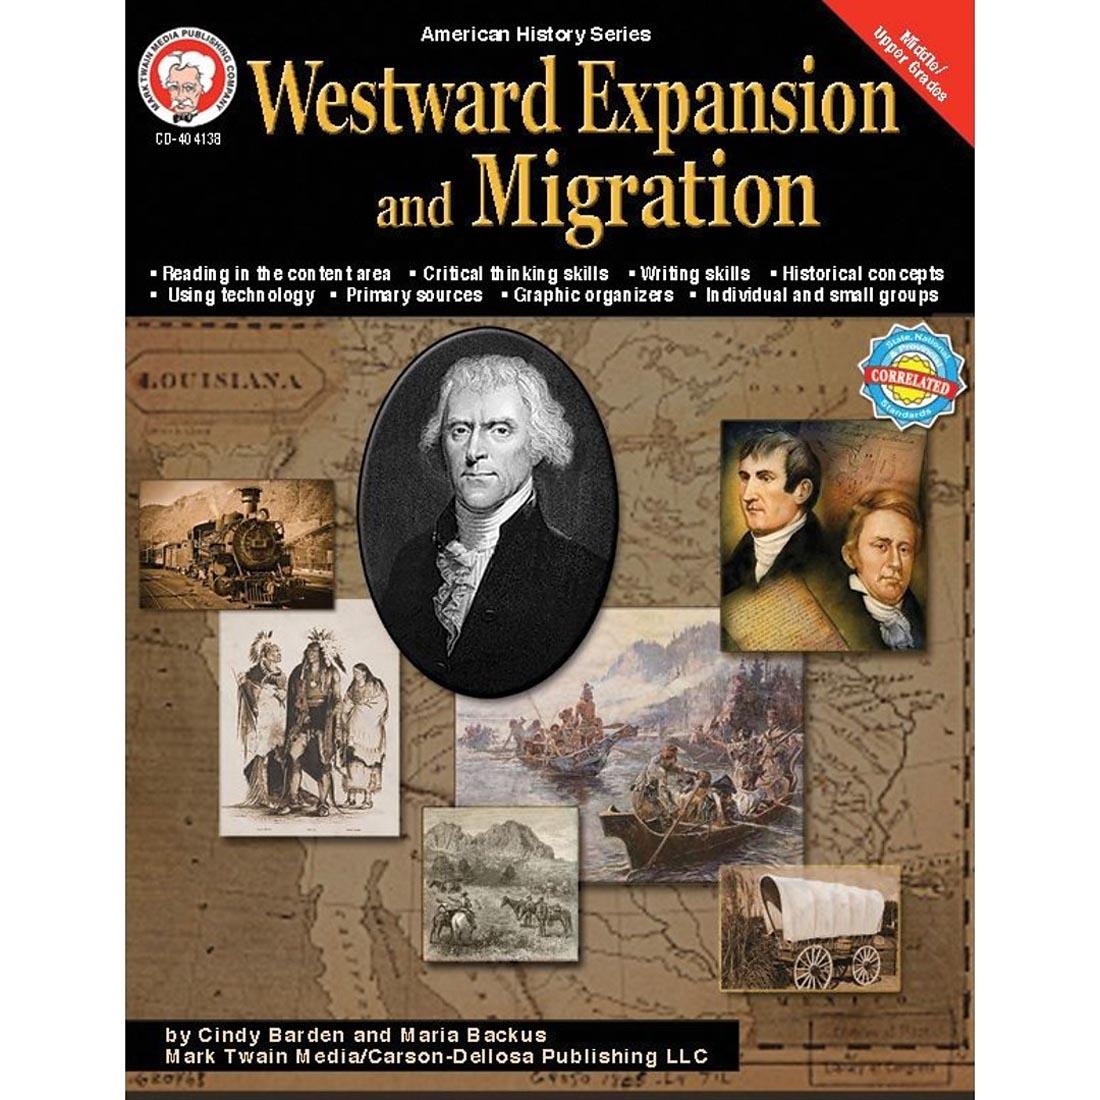 Westward Expansion and Migration American History Series by Mark Twain Media